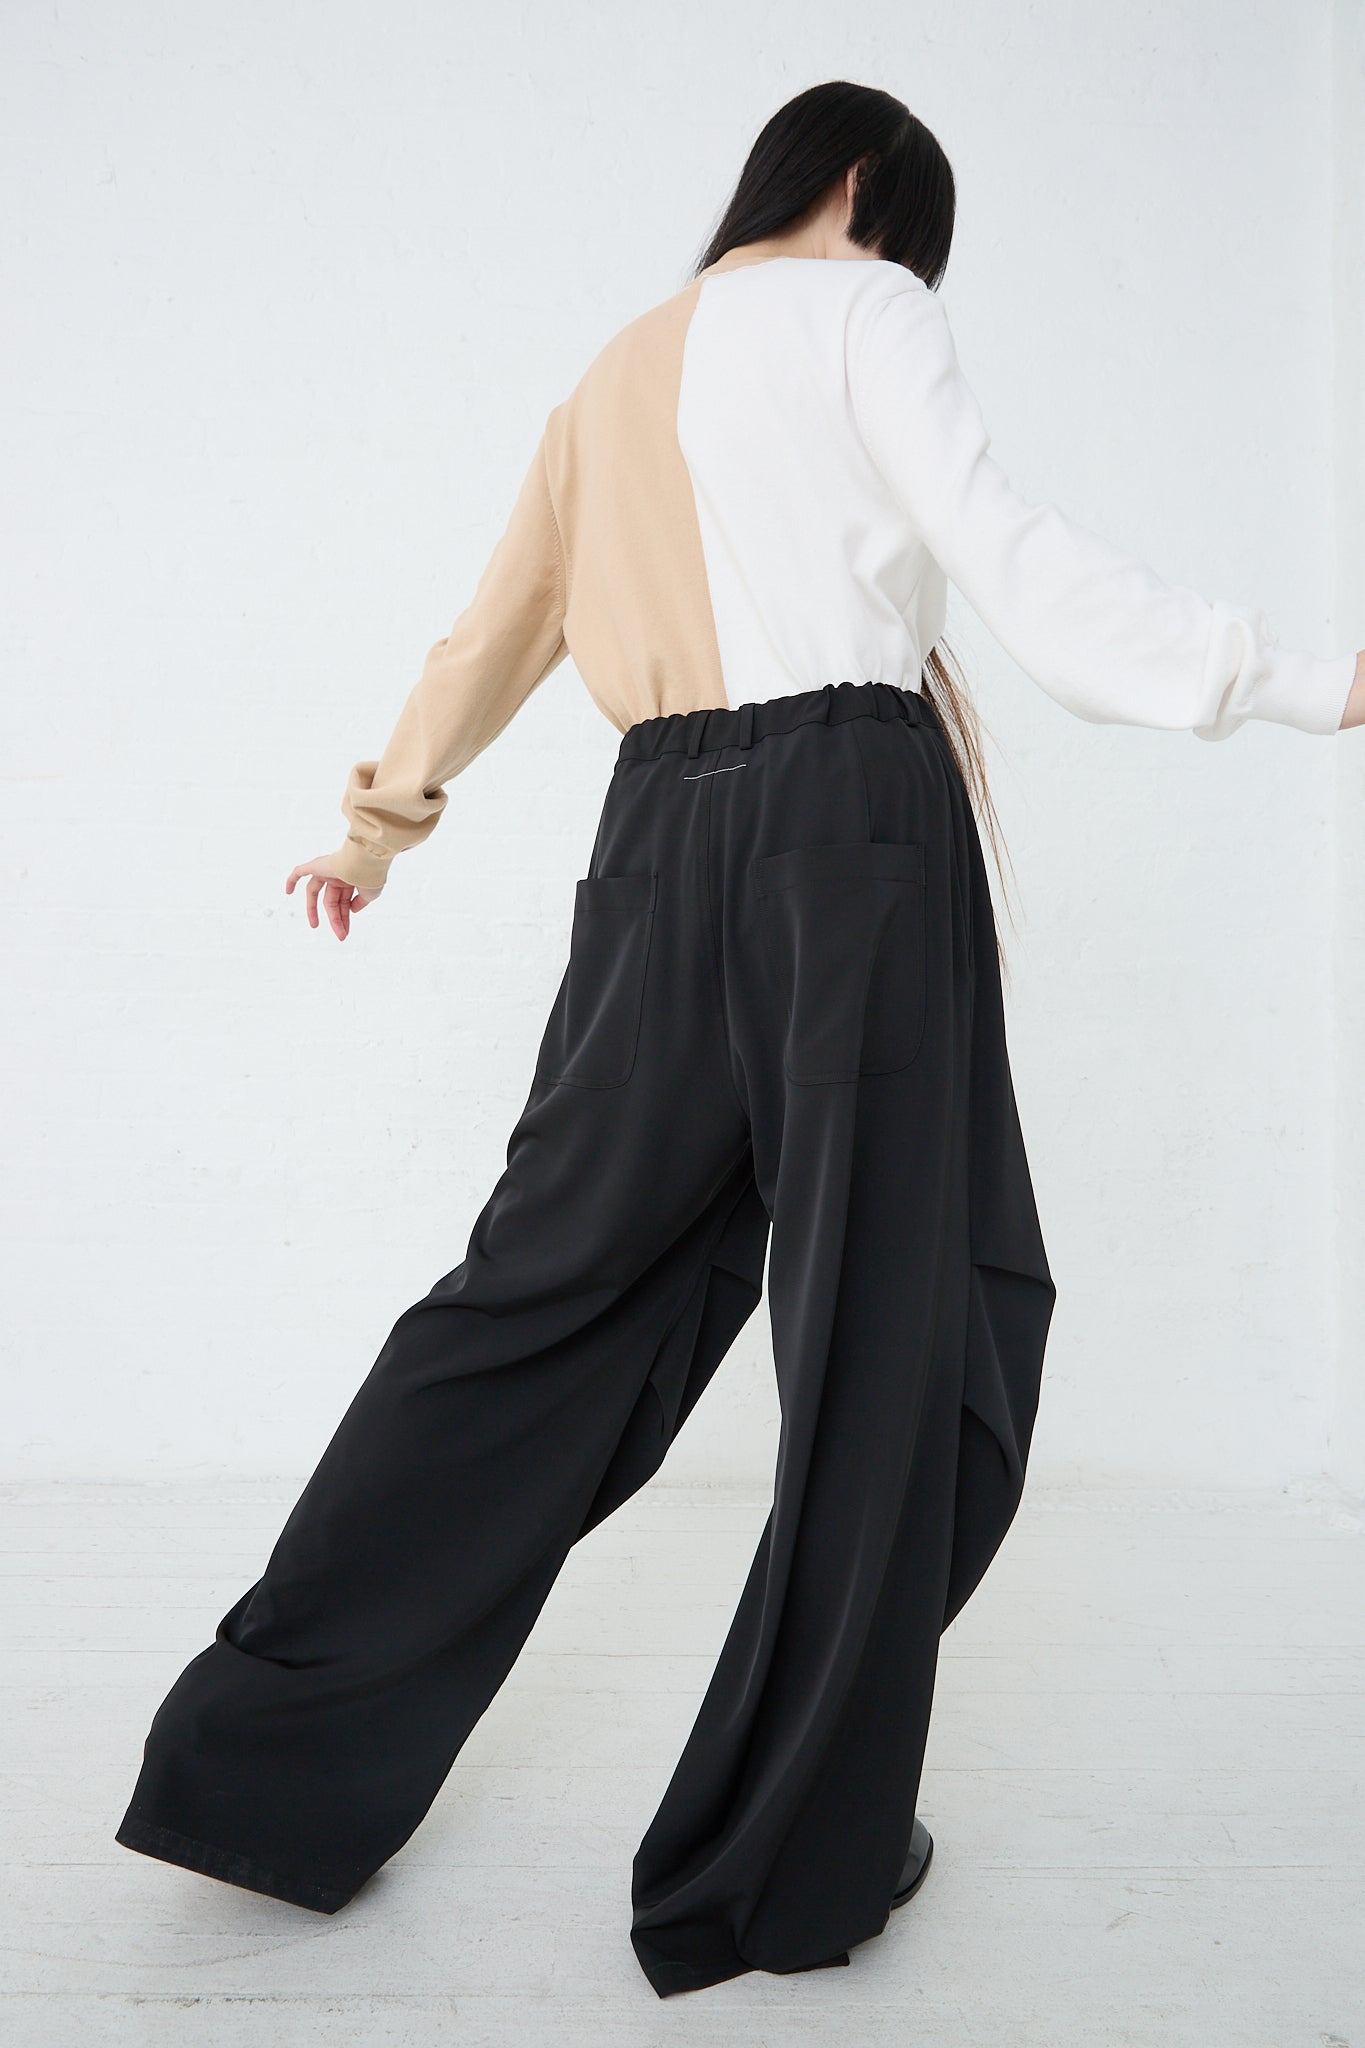 A woman is standing in a white room wearing MM6 black twill stretch pants with an oversized silhouette. Back view and full length.